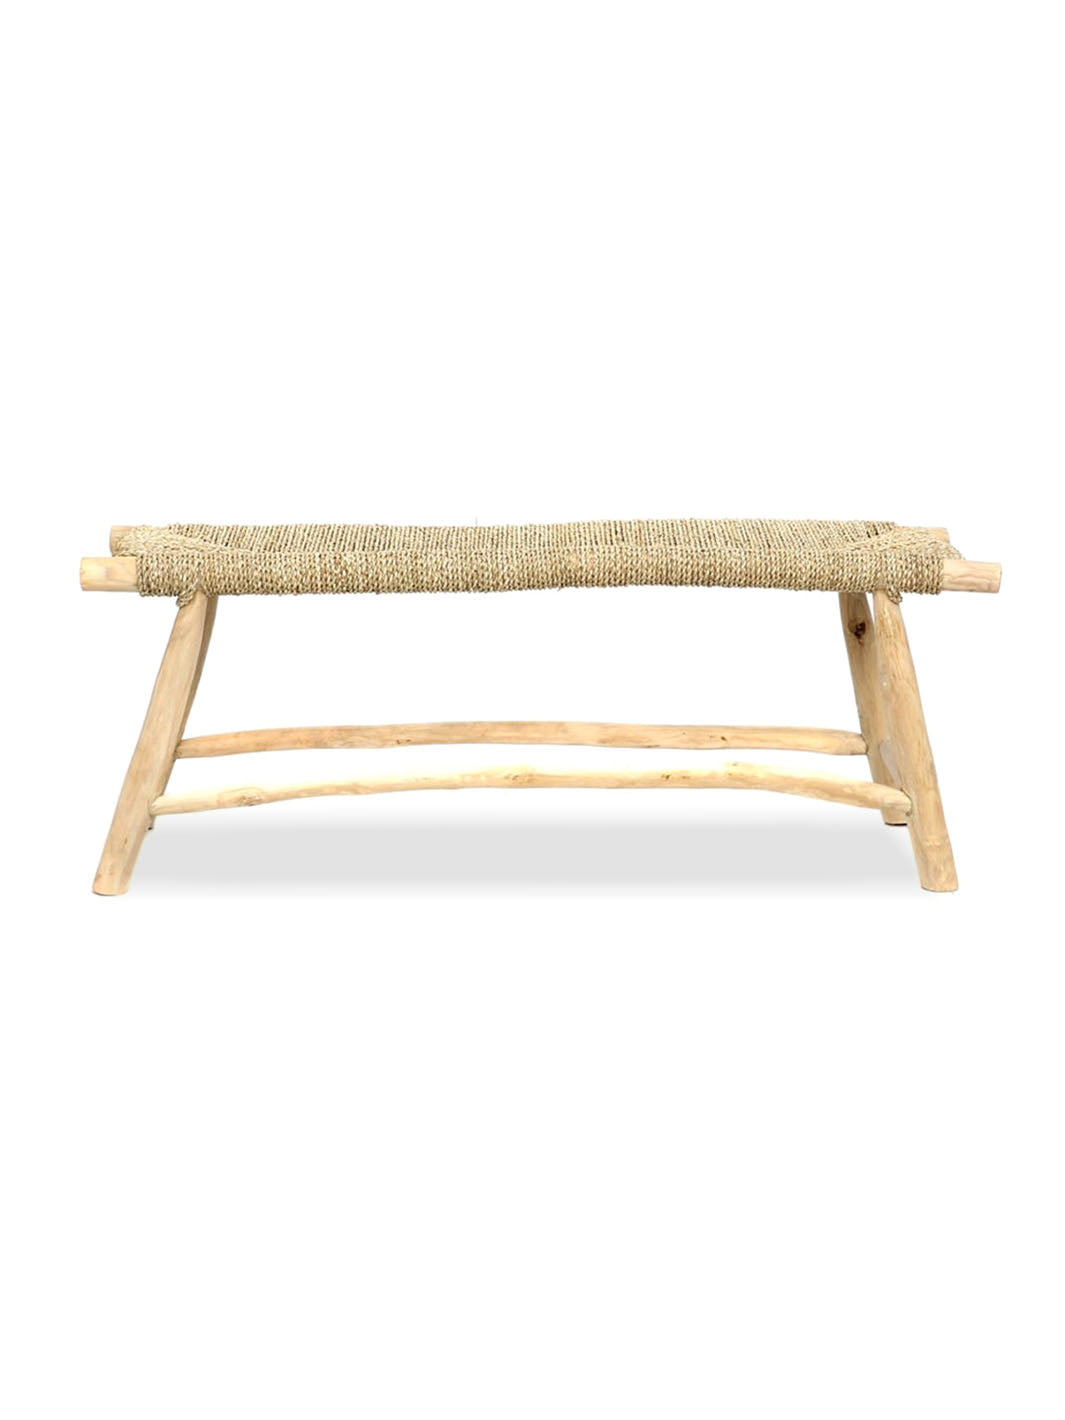 Handcrafted Natural Solid Wood Bench Libitii Benches LIB-0045